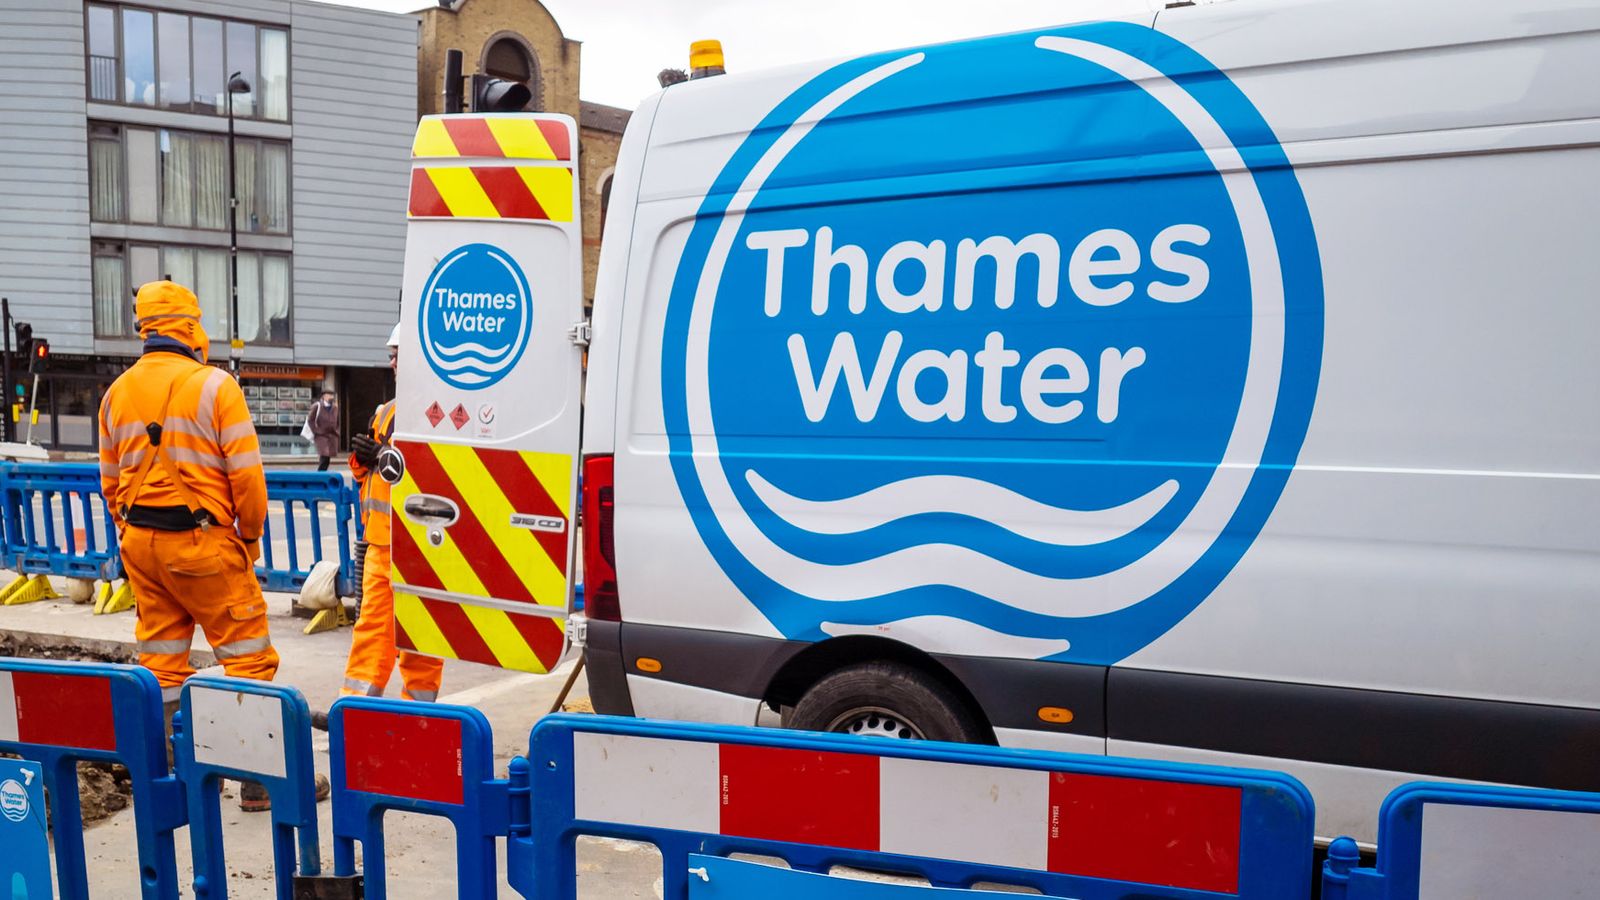 Thames Water working 'constructively' to secure cash as ministers draw up bailout plan